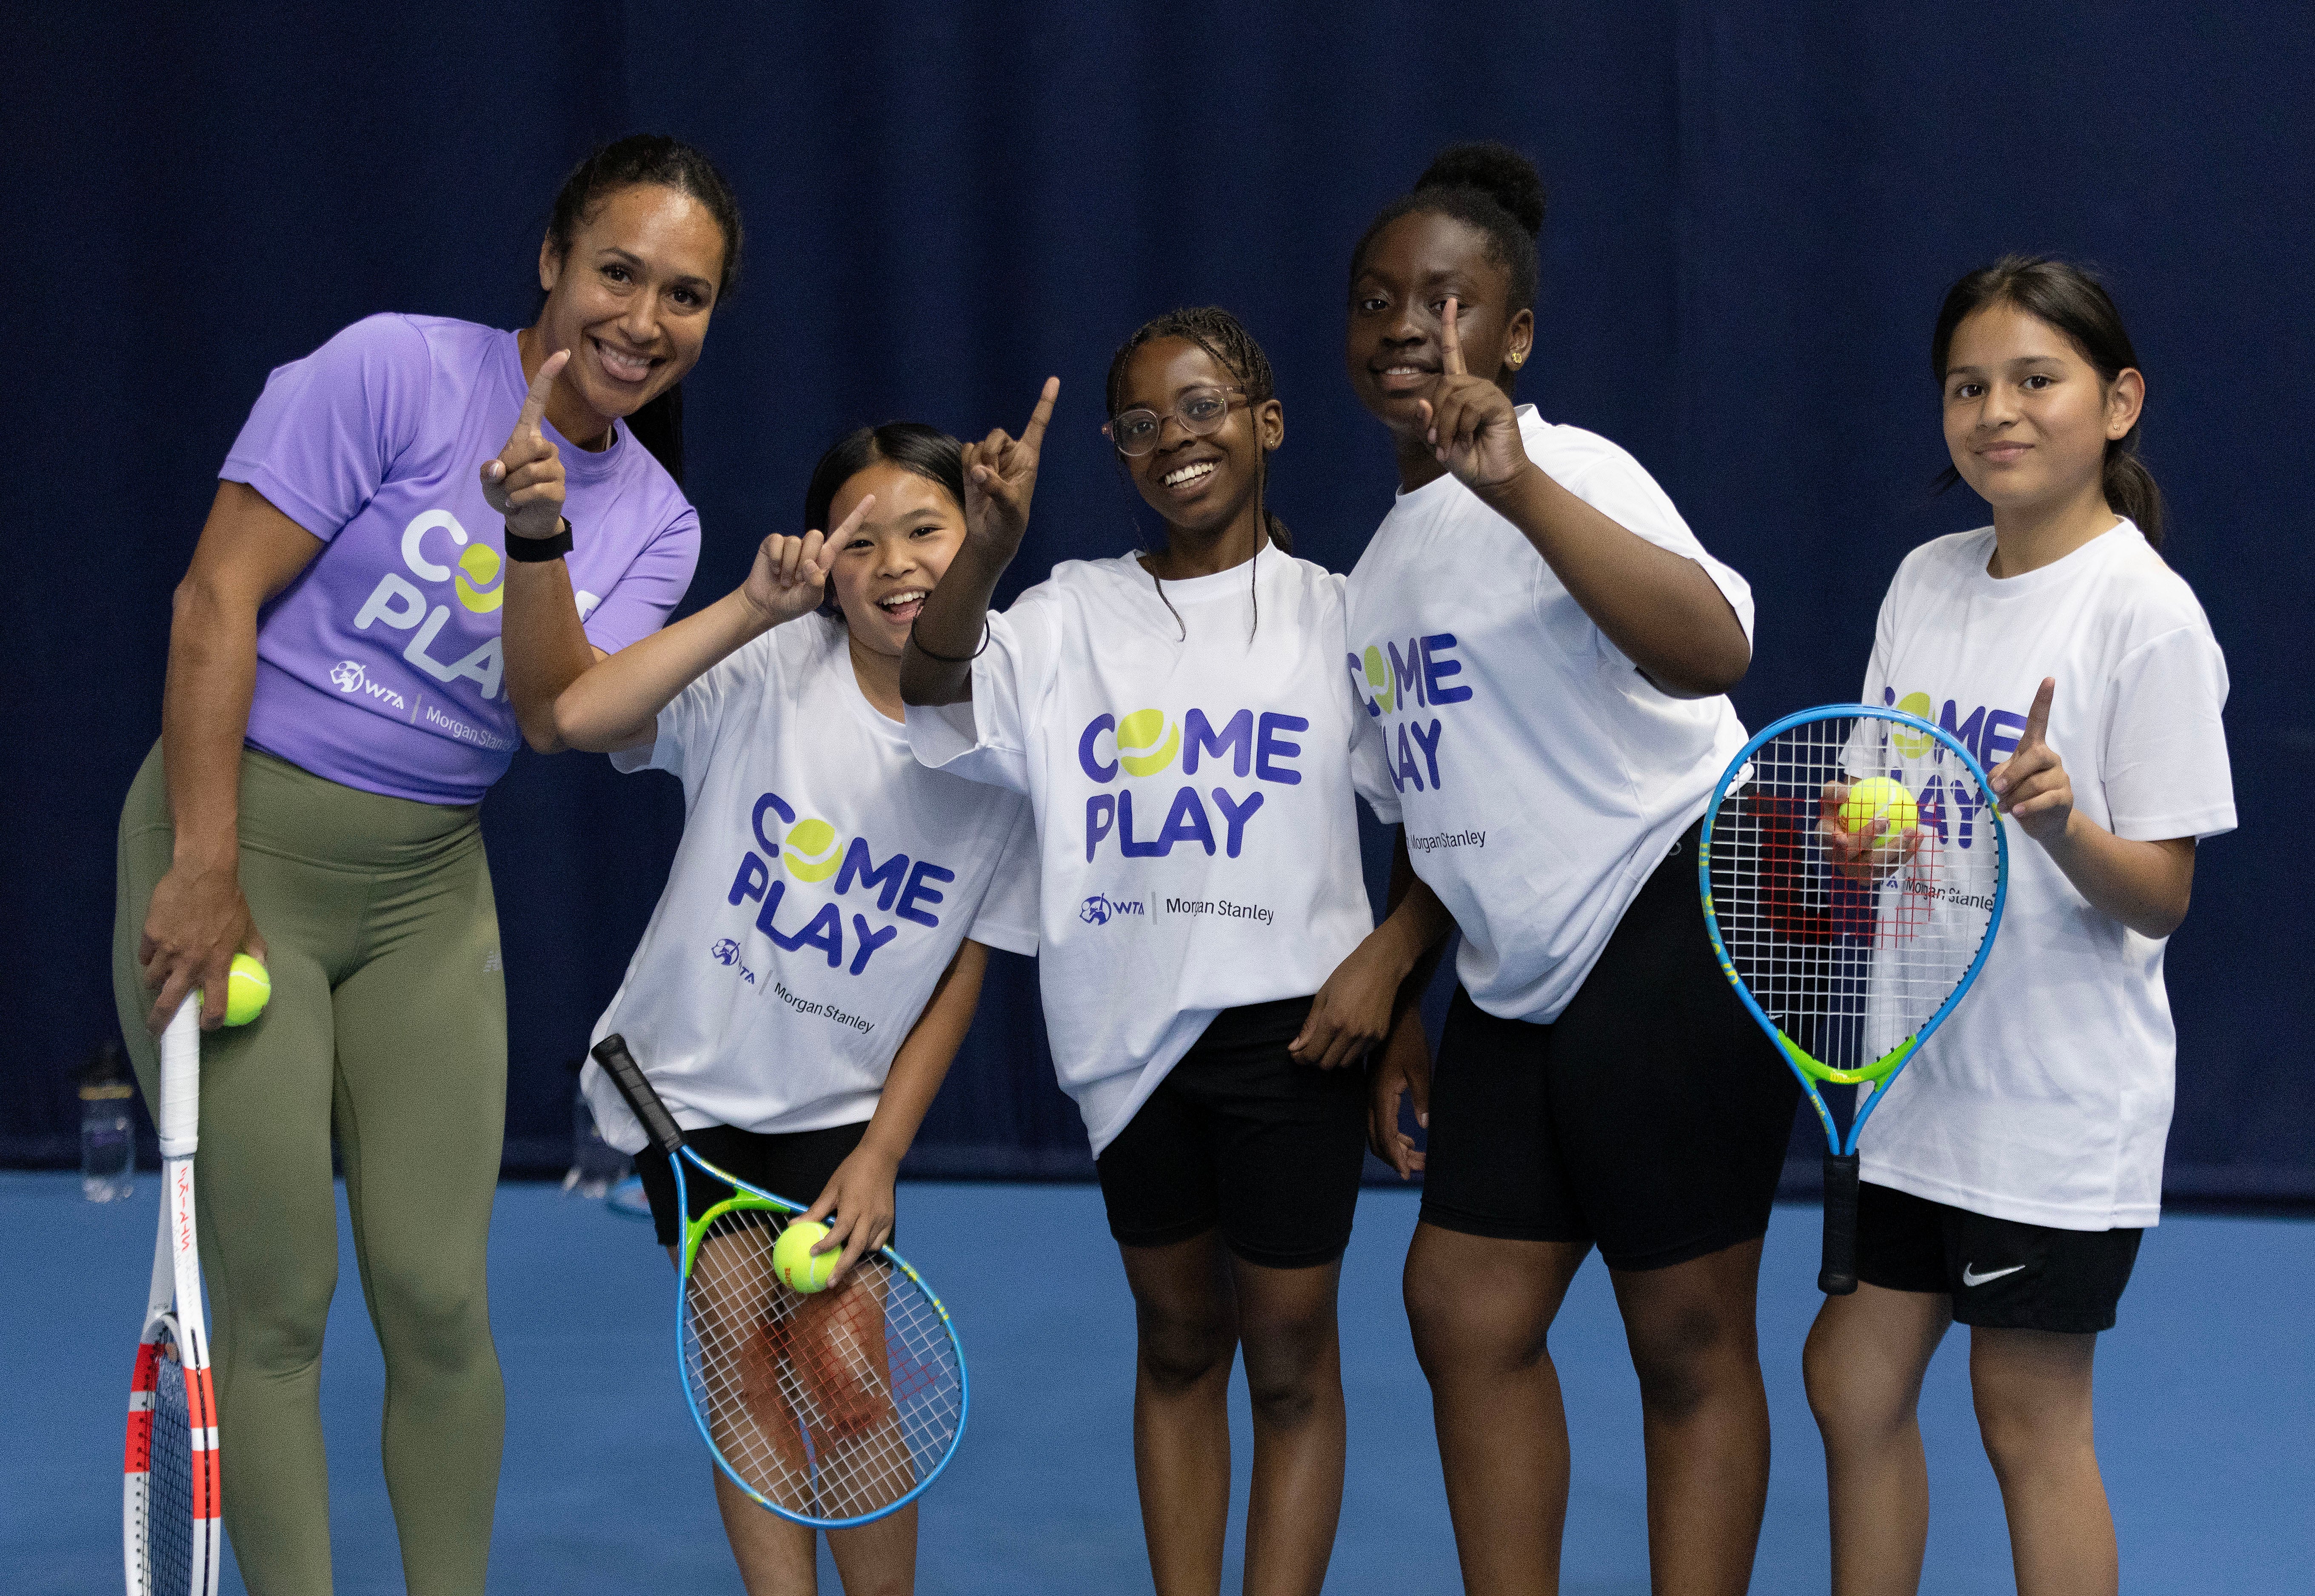 Heather Watson, left, poses with children from Elena Baltacha’s Foundation during a Come Play presented by Morgan Stanley day in London (WTA)